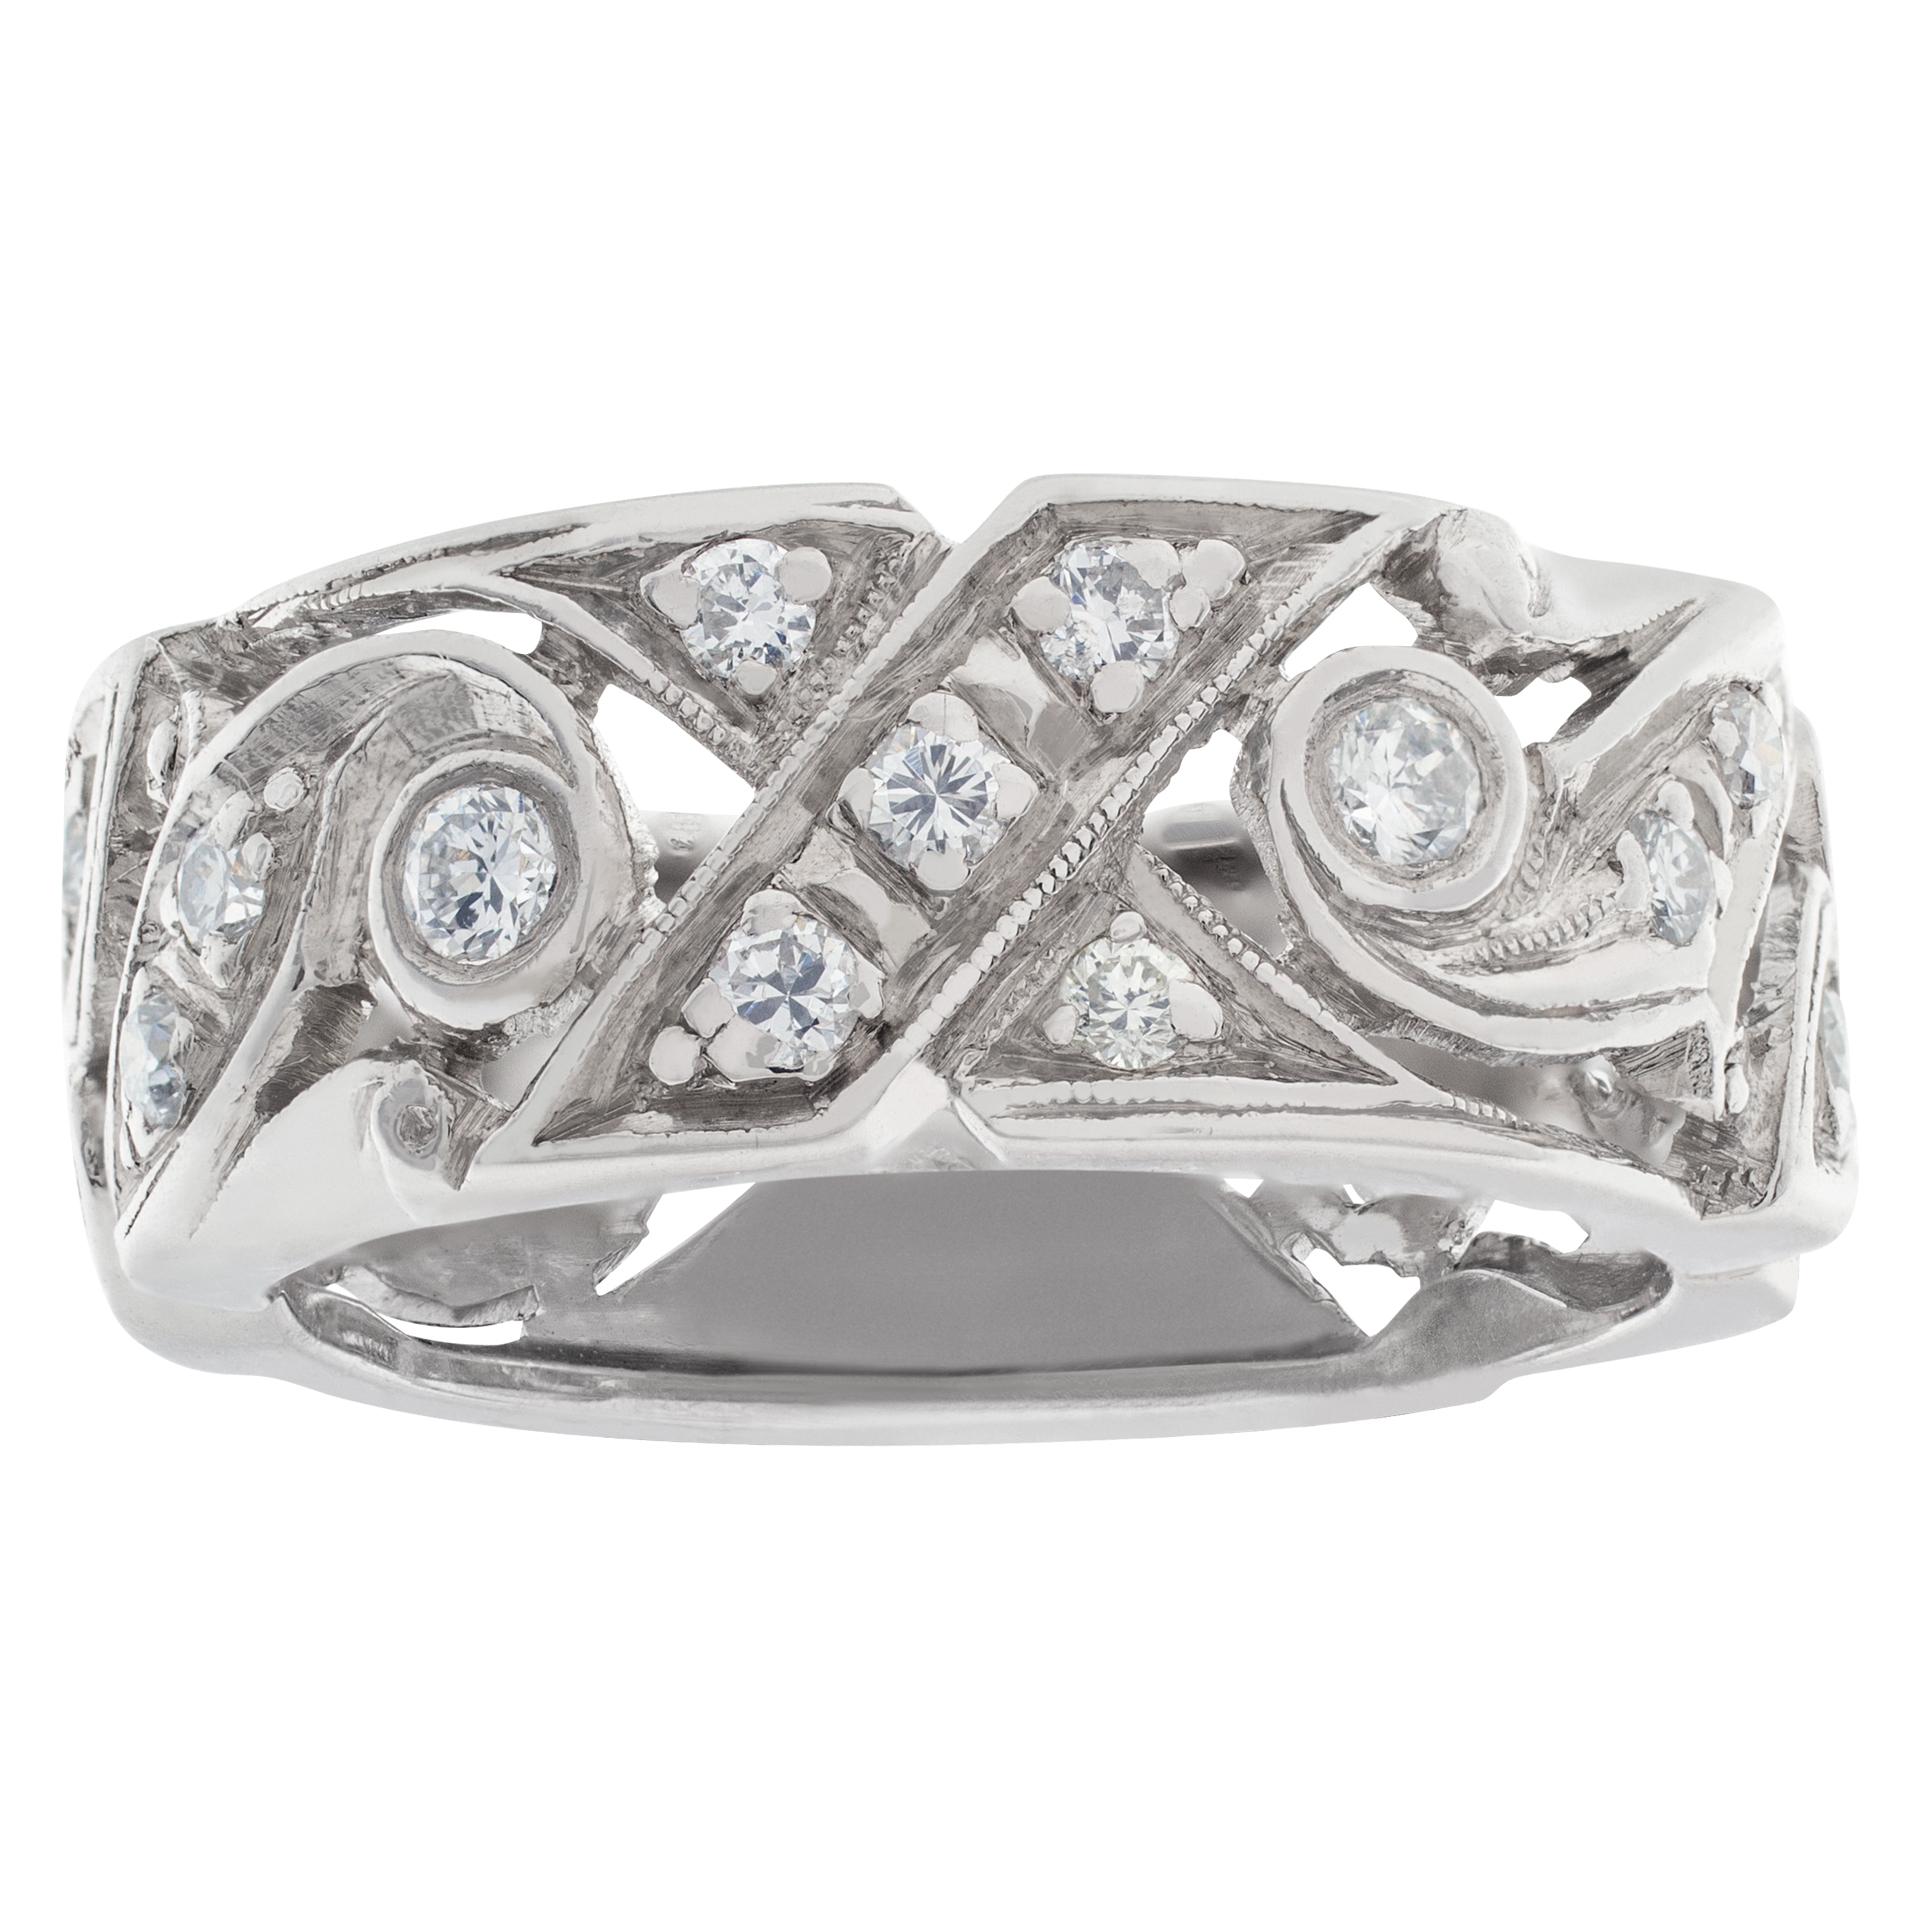 Magical x-design pavé diamond ring in 14k white gold with app. 0.50 carats in diamonds. Size 5.5.

This ring is currently size 0 and some items can be sized up or down, please ask! It weighs 0 gramms and is 14k.